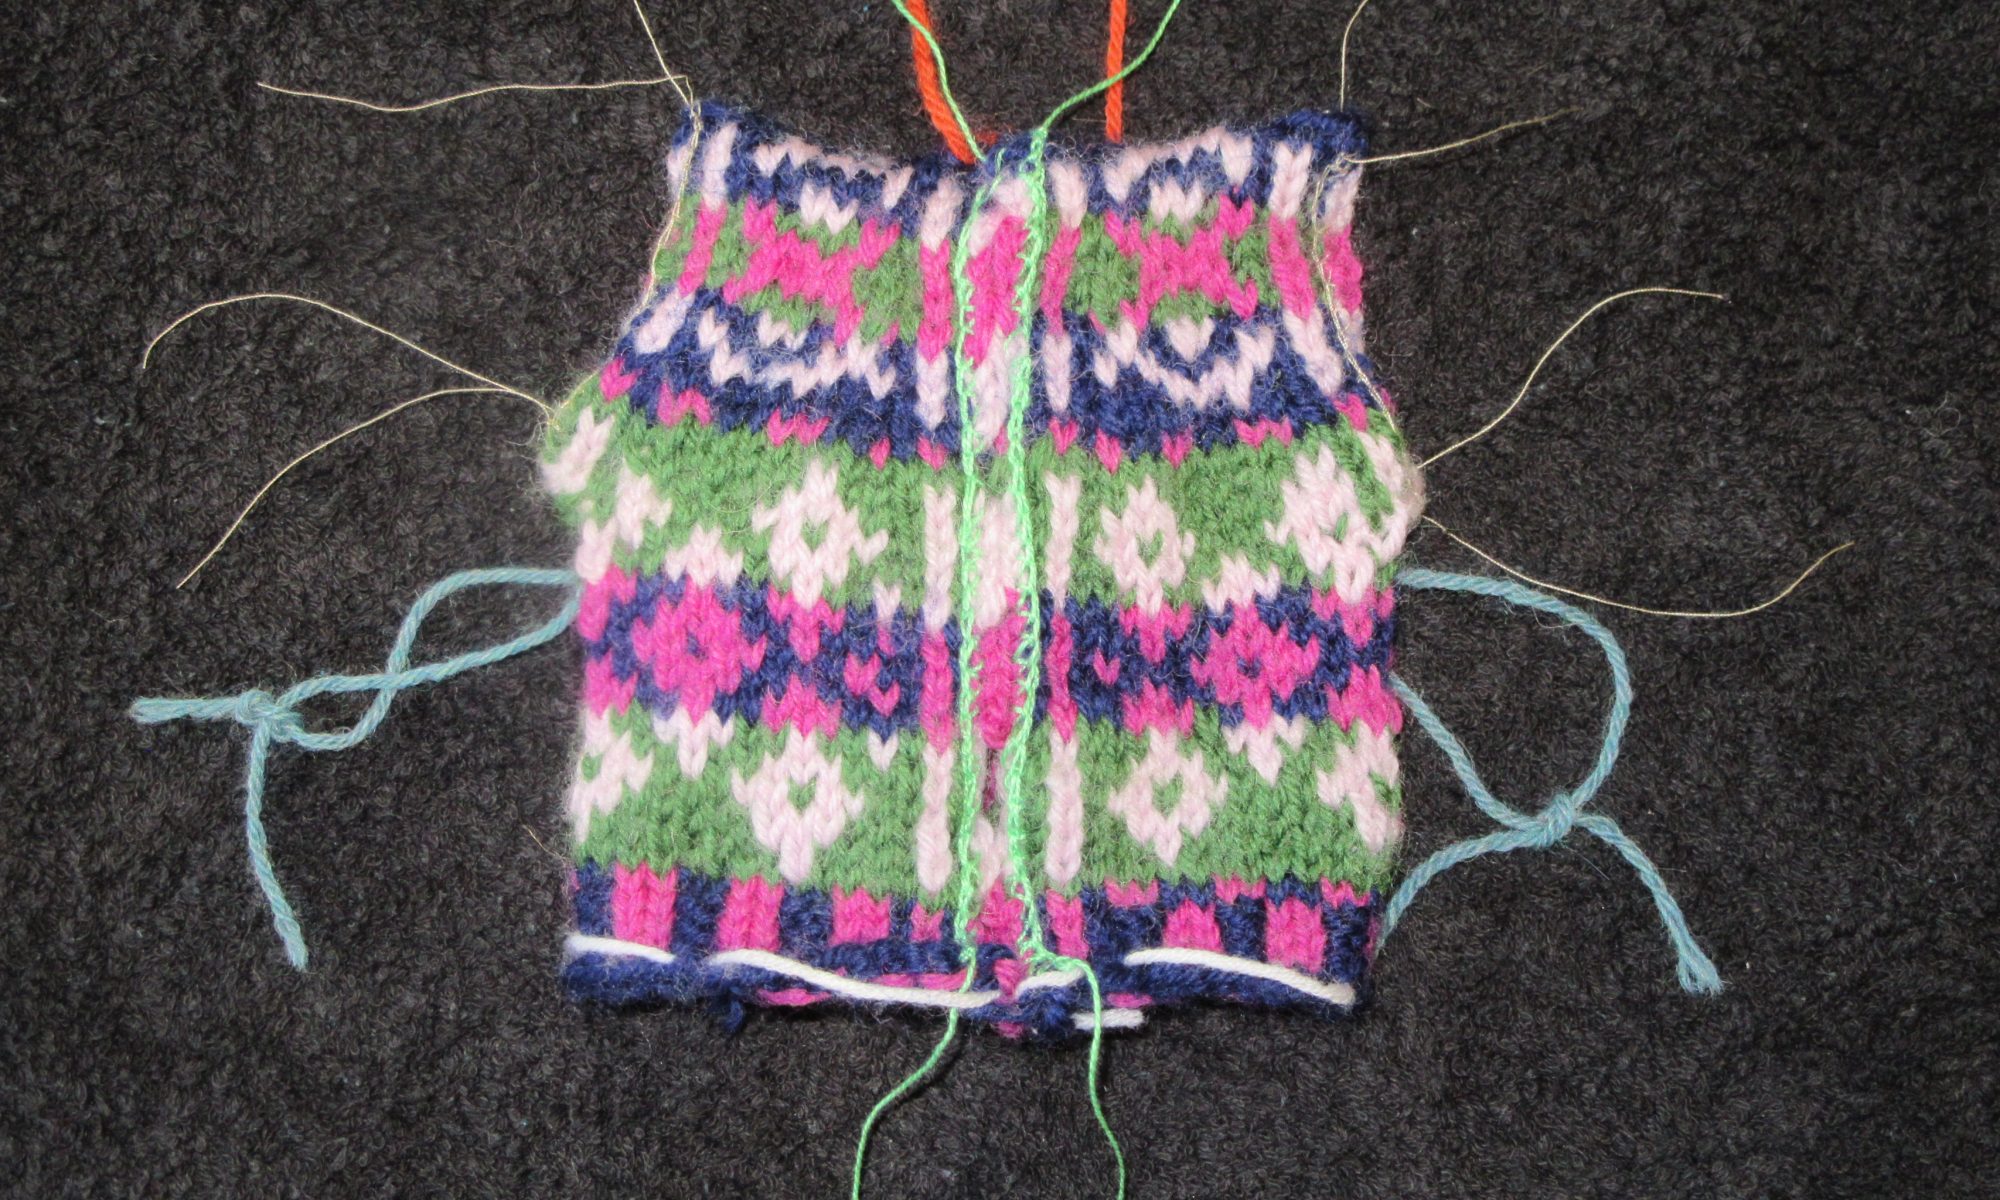 The waistcoat for the Introduction to stranded knitting tutorial after the steeks have been reinforced using crochet reinforcement. The front steek has been reinforced with crochet cotton, the armhole steeks with sewing thread, showing that the type of thread used is not important.